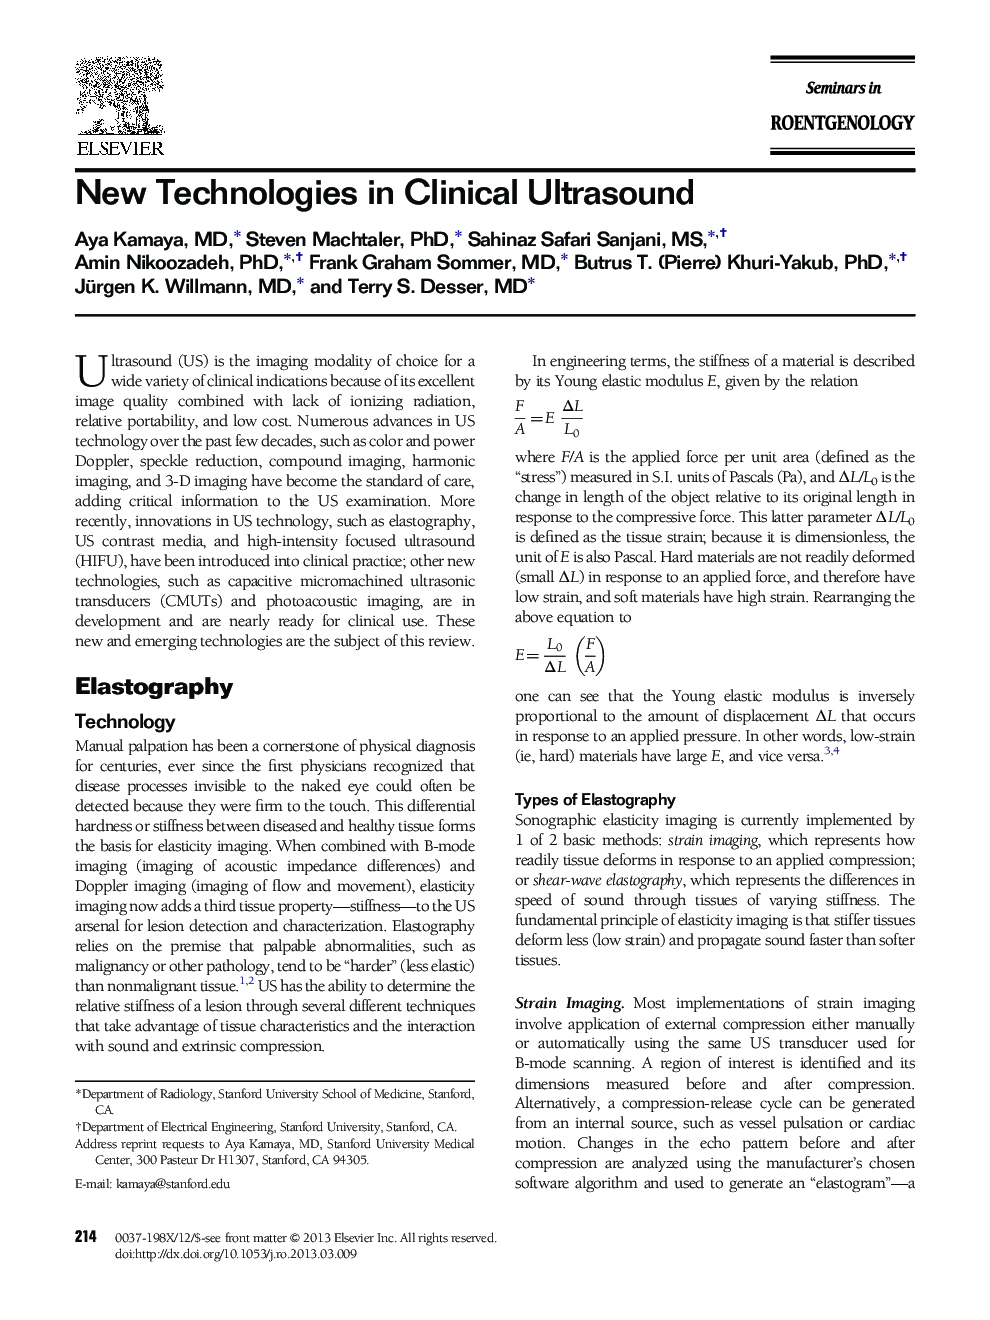 New Technologies in Clinical Ultrasound